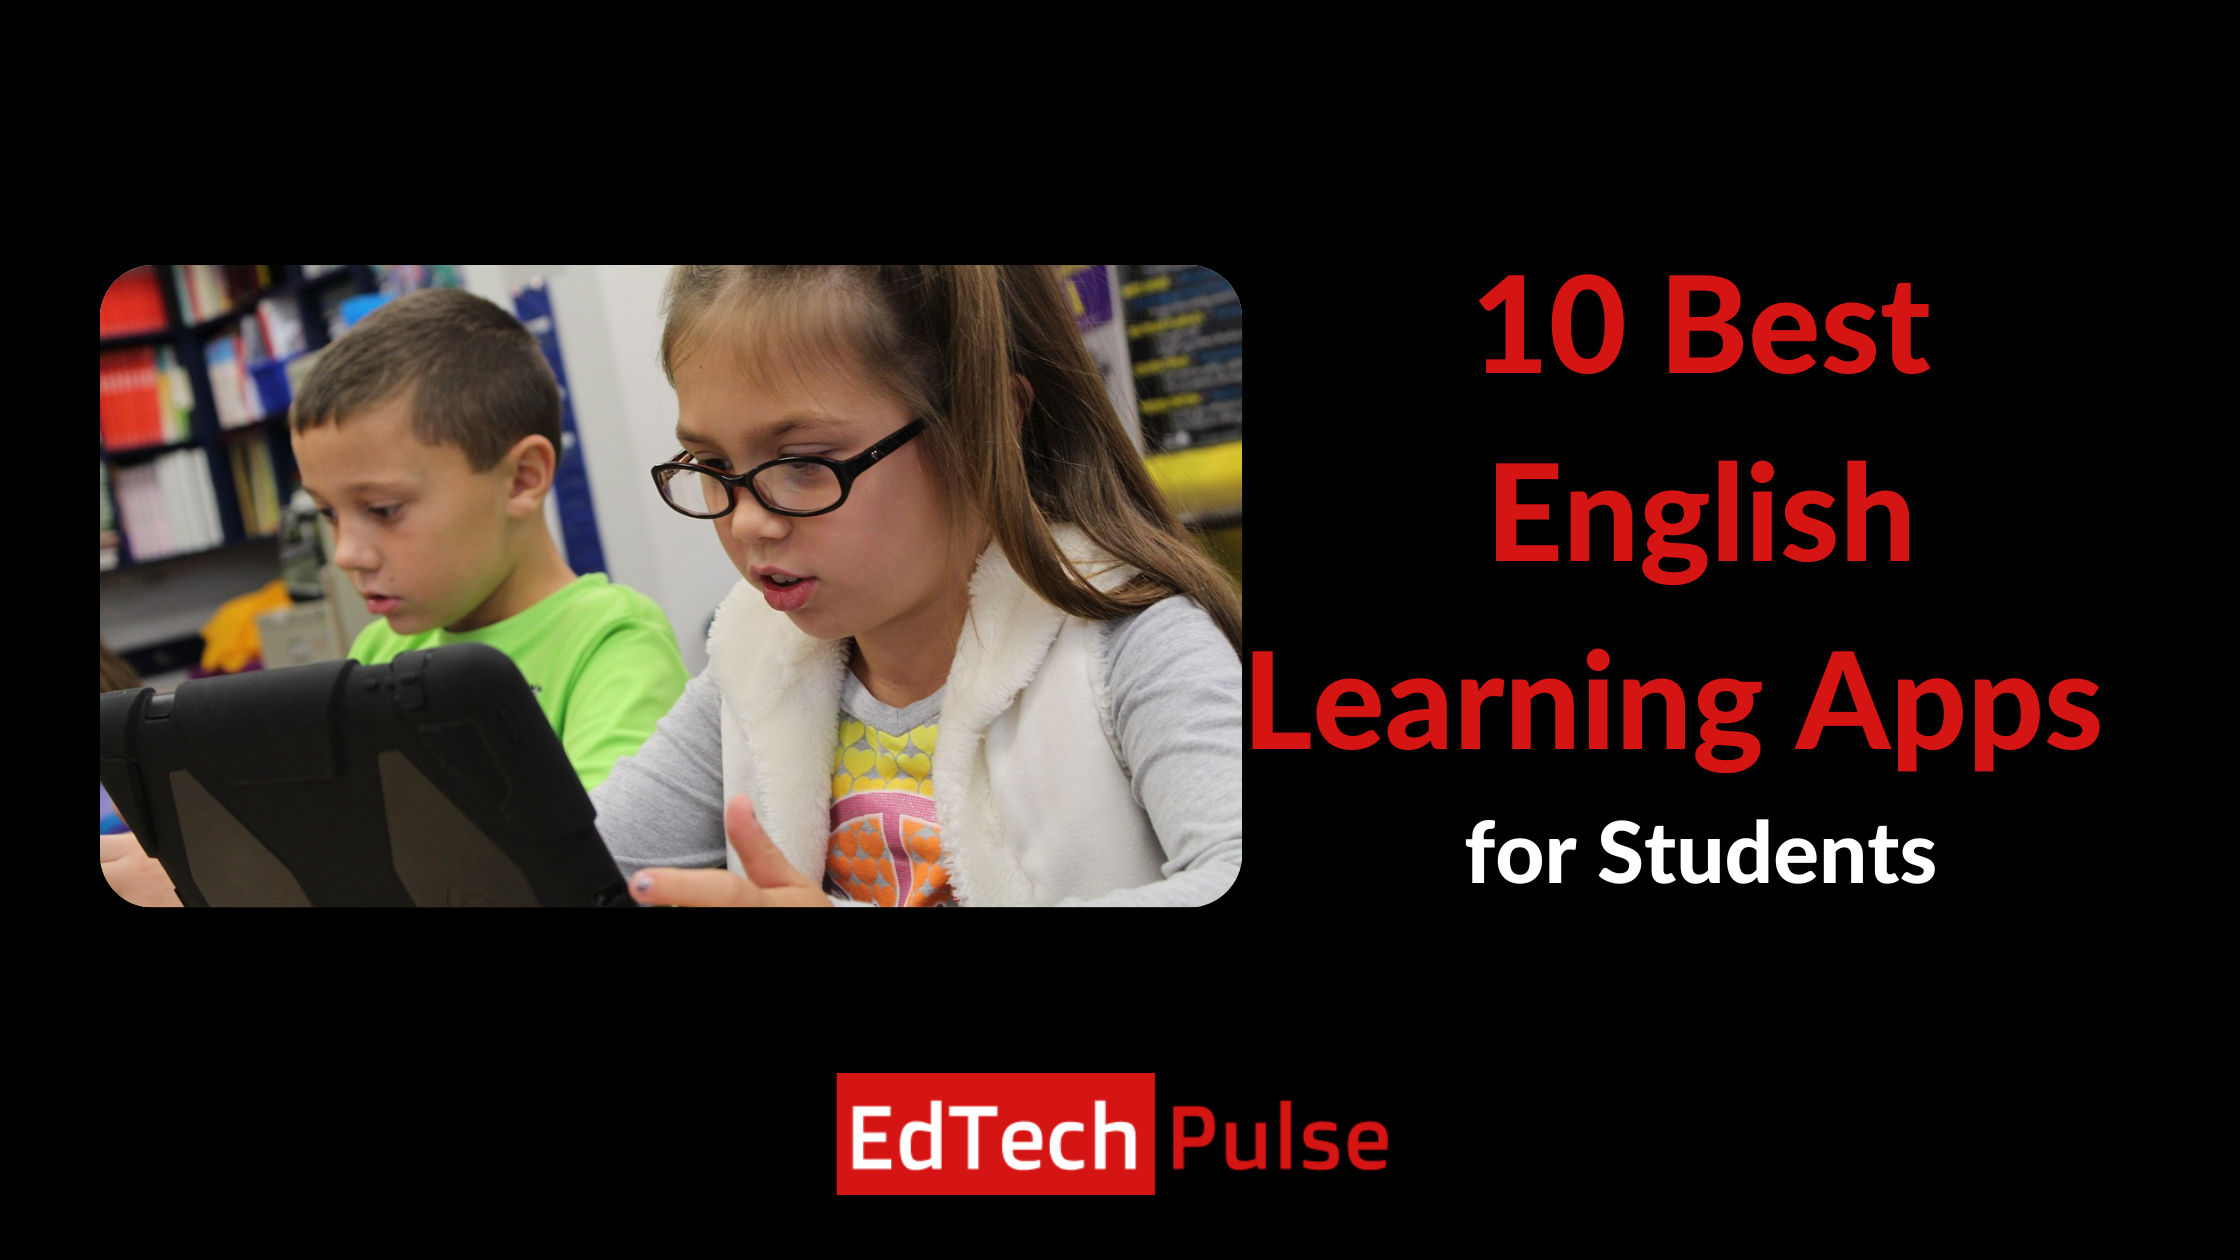 10 Best English Learning Apps for Students